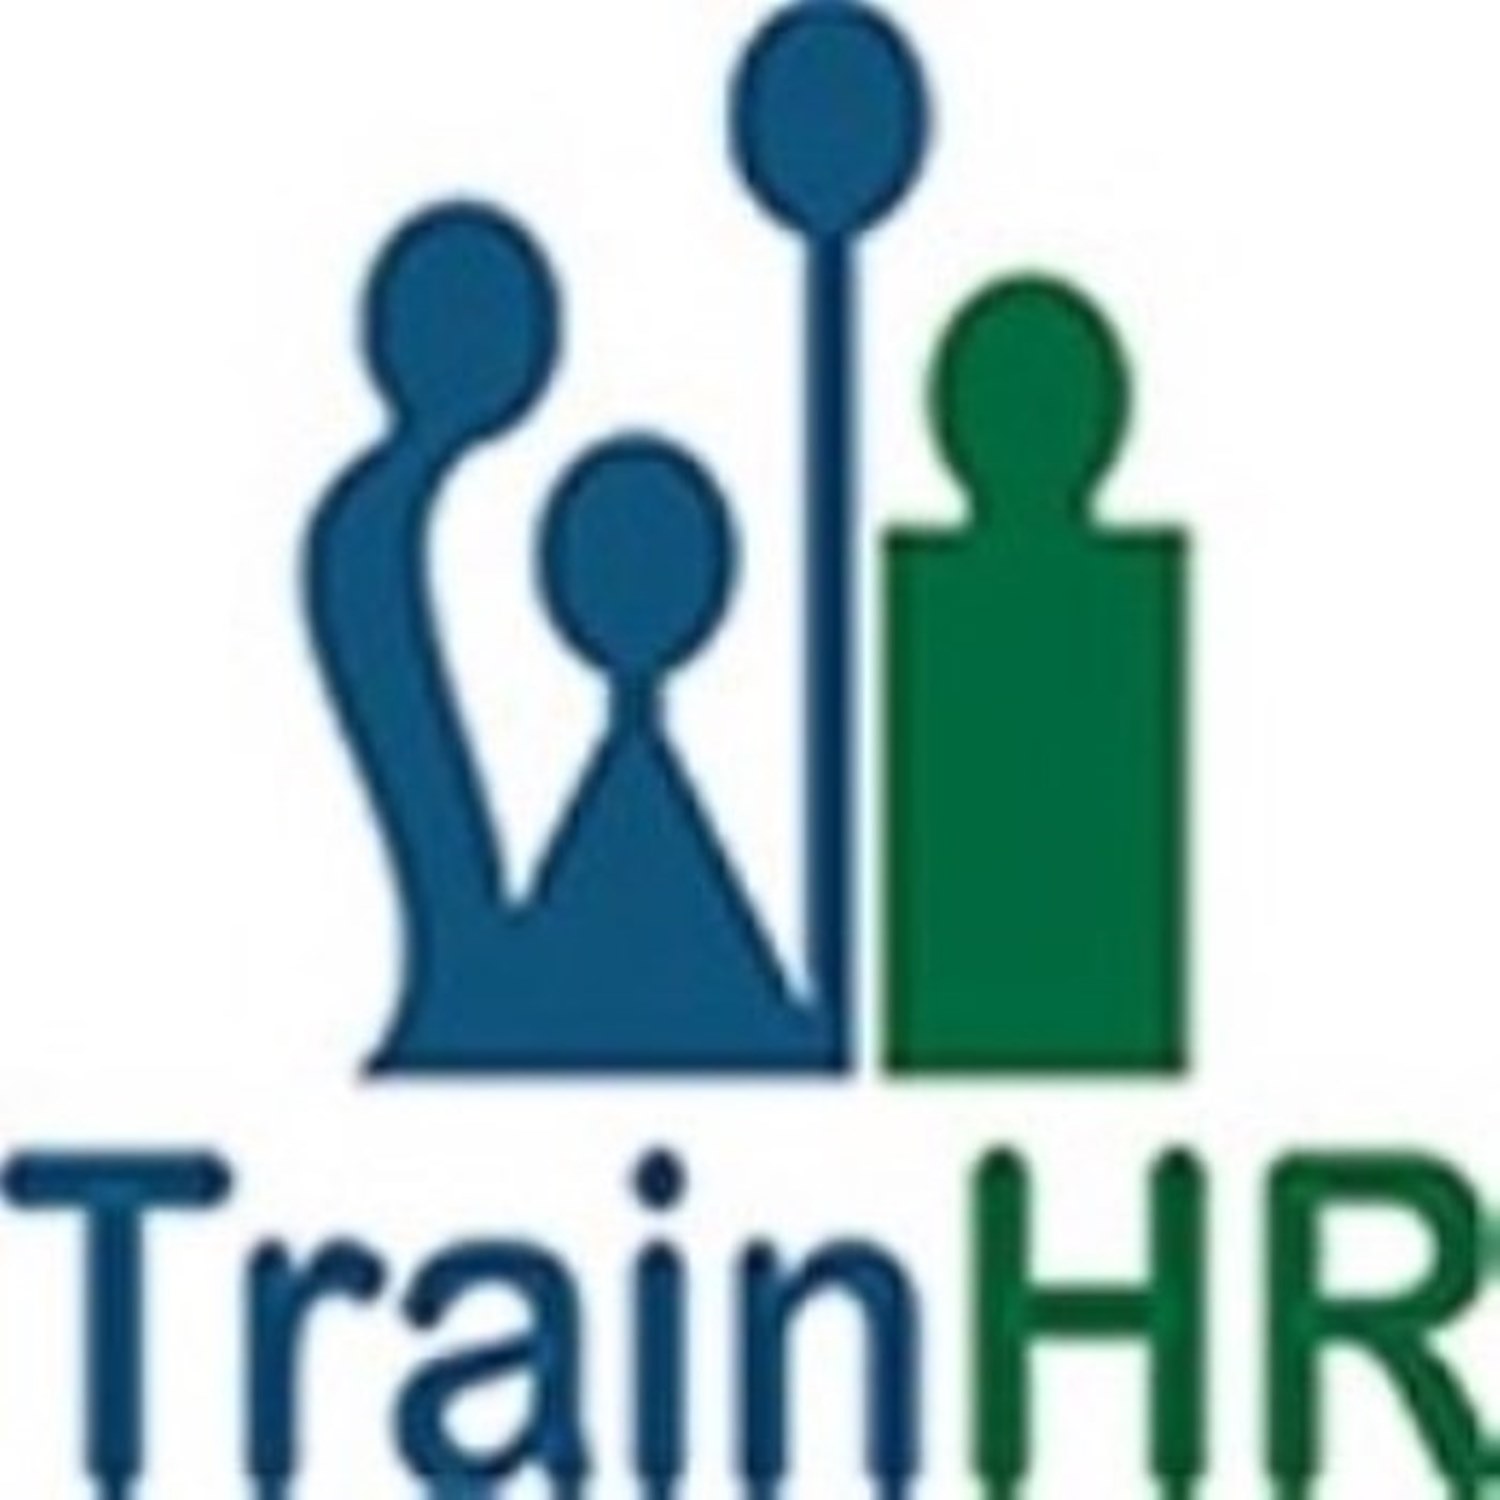 HR Metrics: A Critical Measurement of the Impact of Human Resources Management